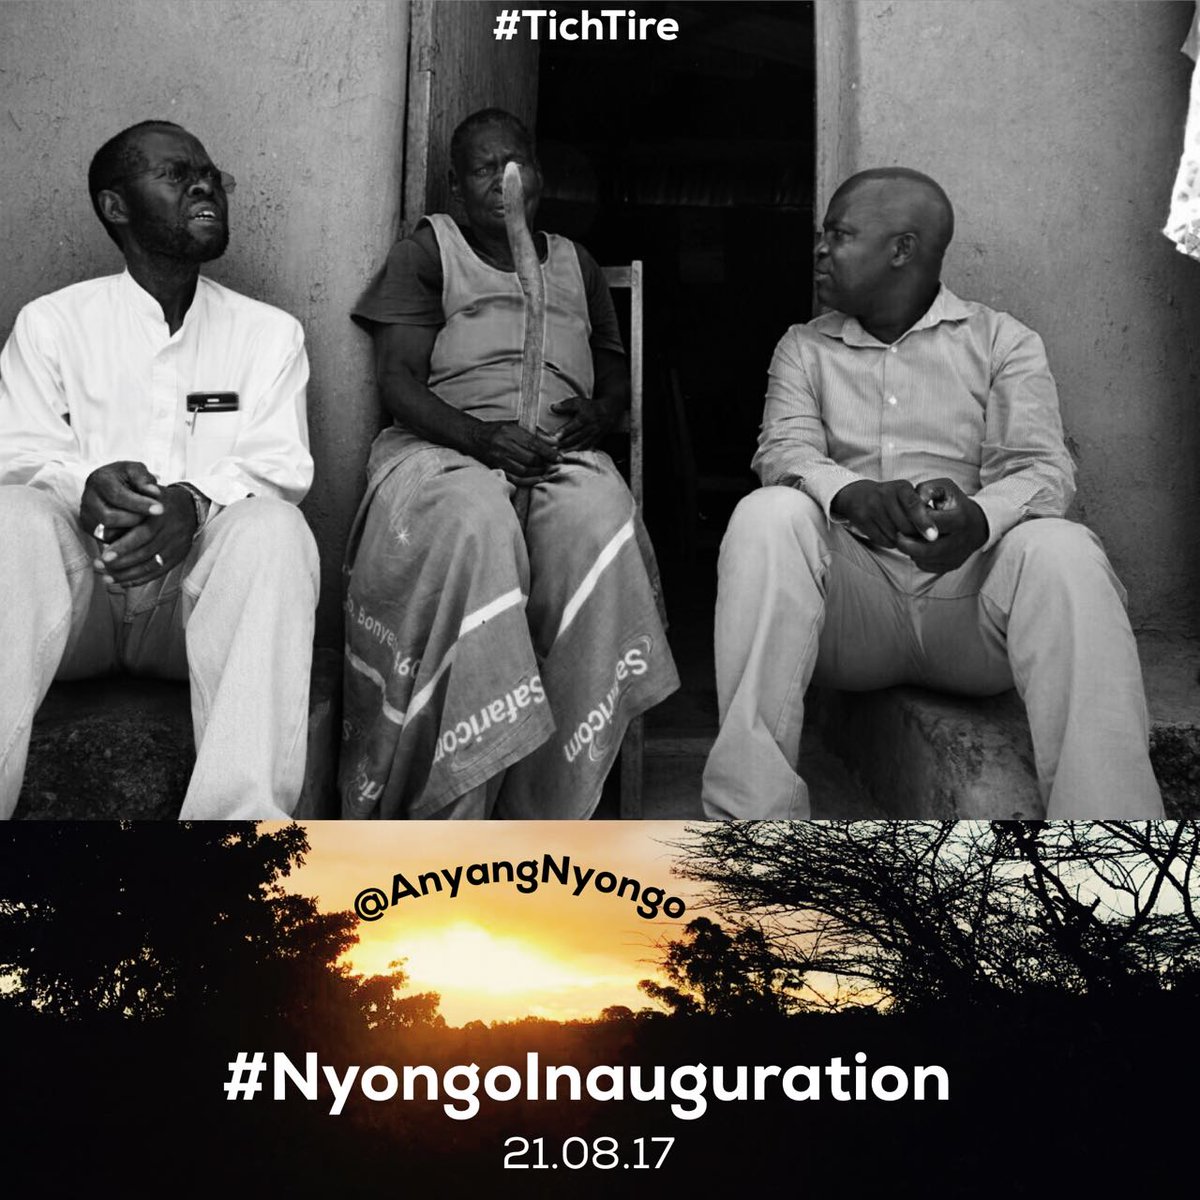 Good morning! A new dawn for #Kisumu 'The Mission Is Possible!' Gi .@AnyangNyongo & Owili at the helm
Follow #NyongoInauguration #TichTire